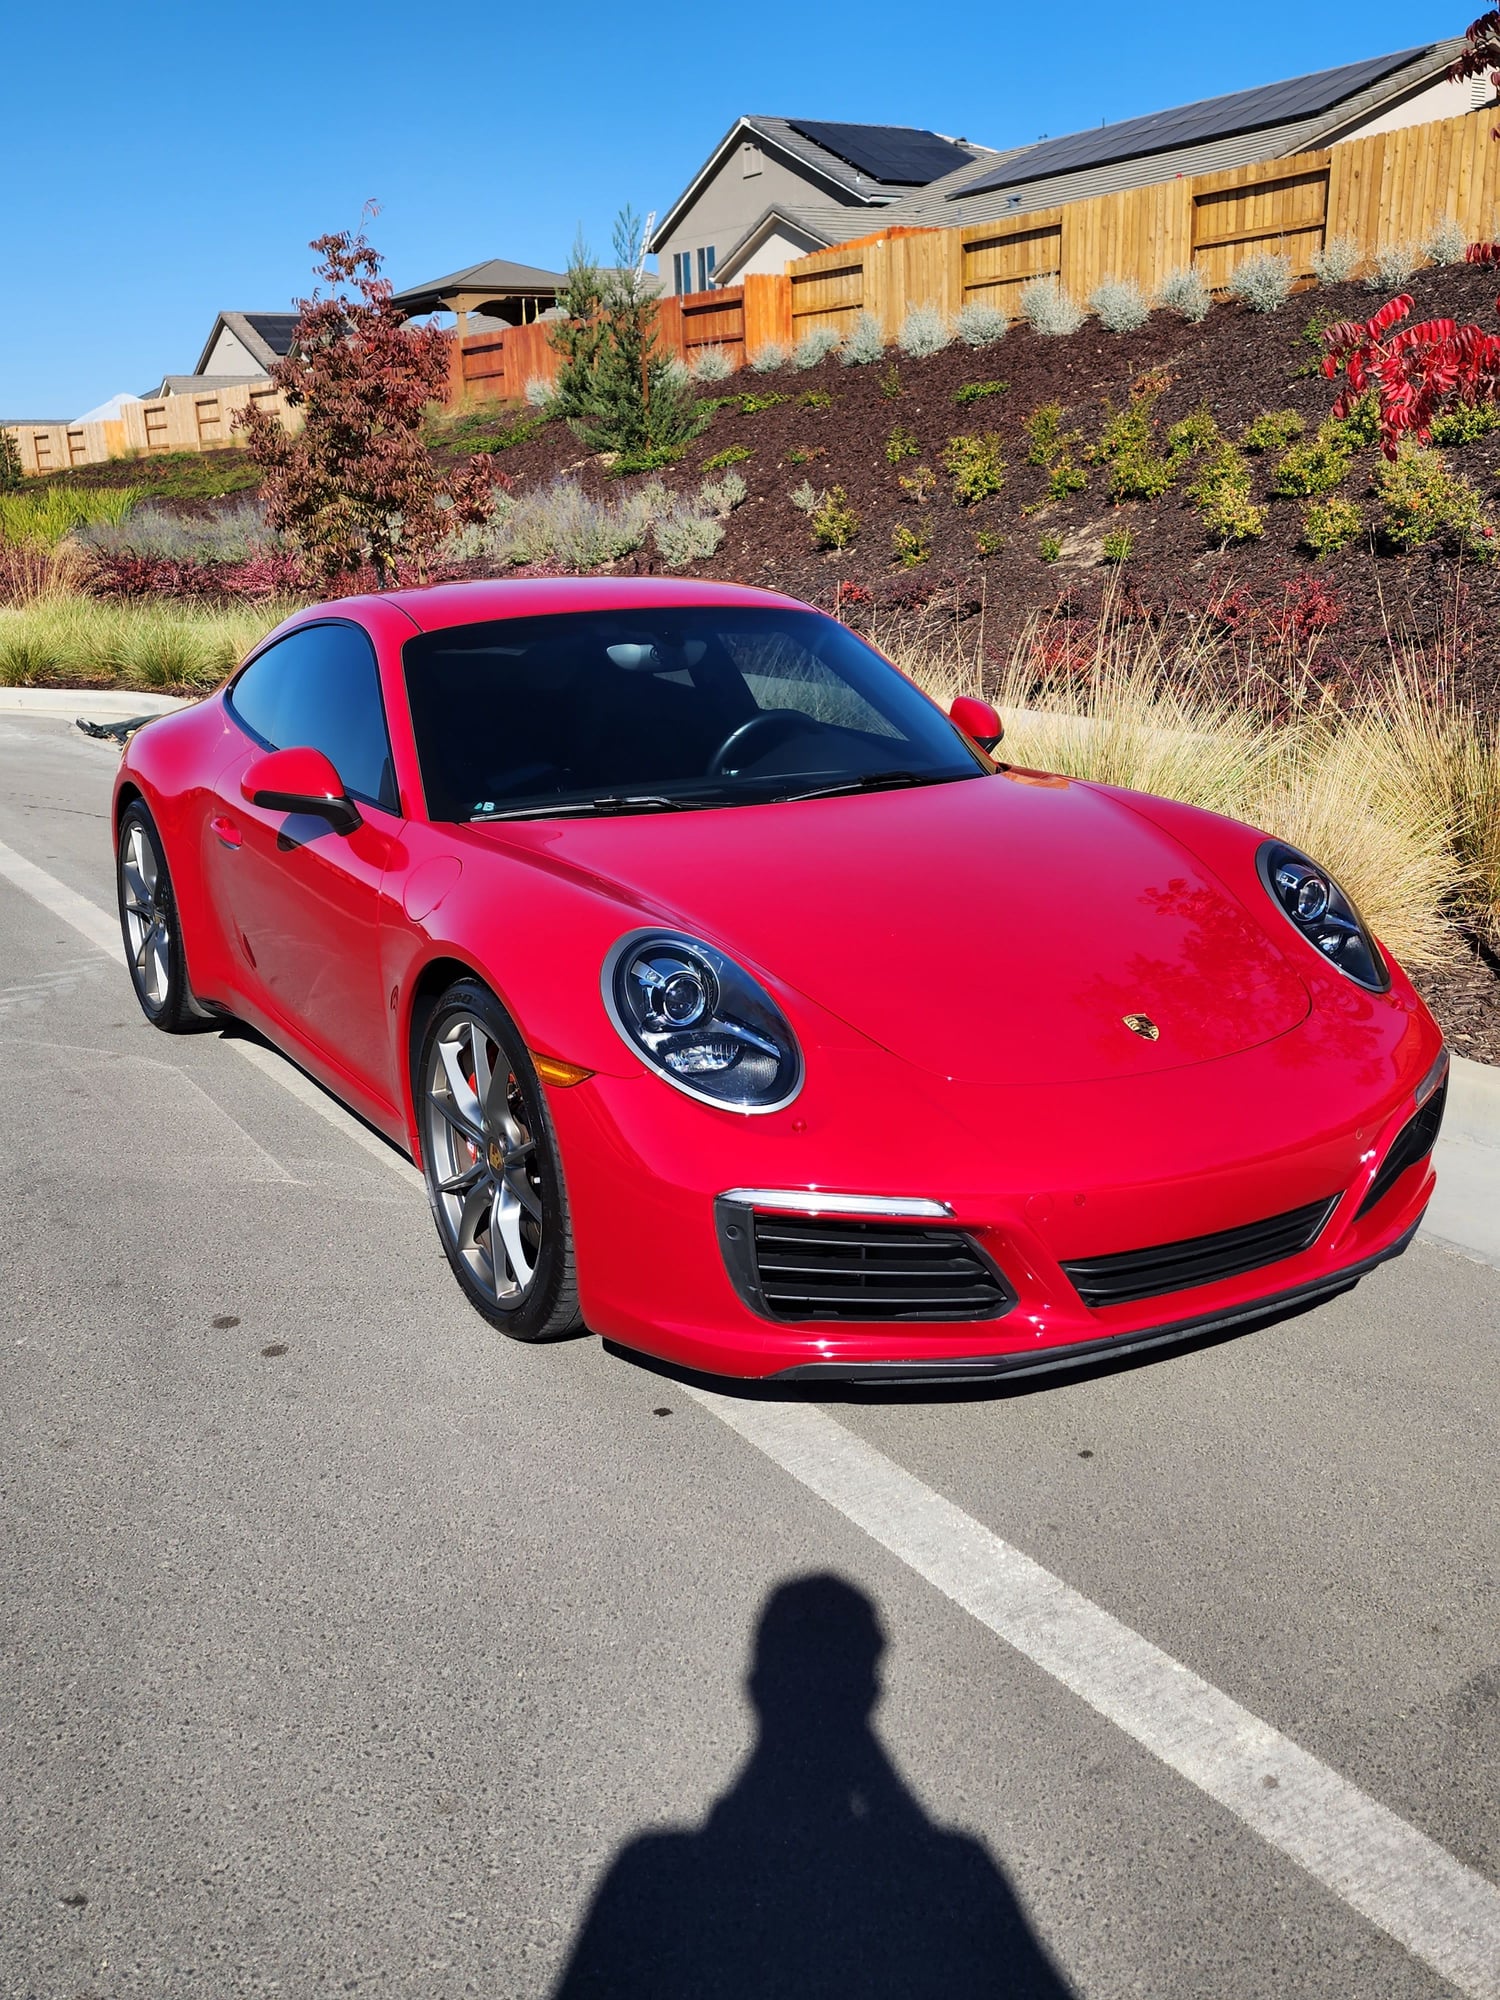 2017 Porsche 911 - 2017 Base Carrera, Carmine red, 40K miles - Used - VIN WP0AA2A95HS106910 - 41,000 Miles - 6 cyl - 2WD - Automatic - Coupe - Red - Hollister, CA 95023, United States